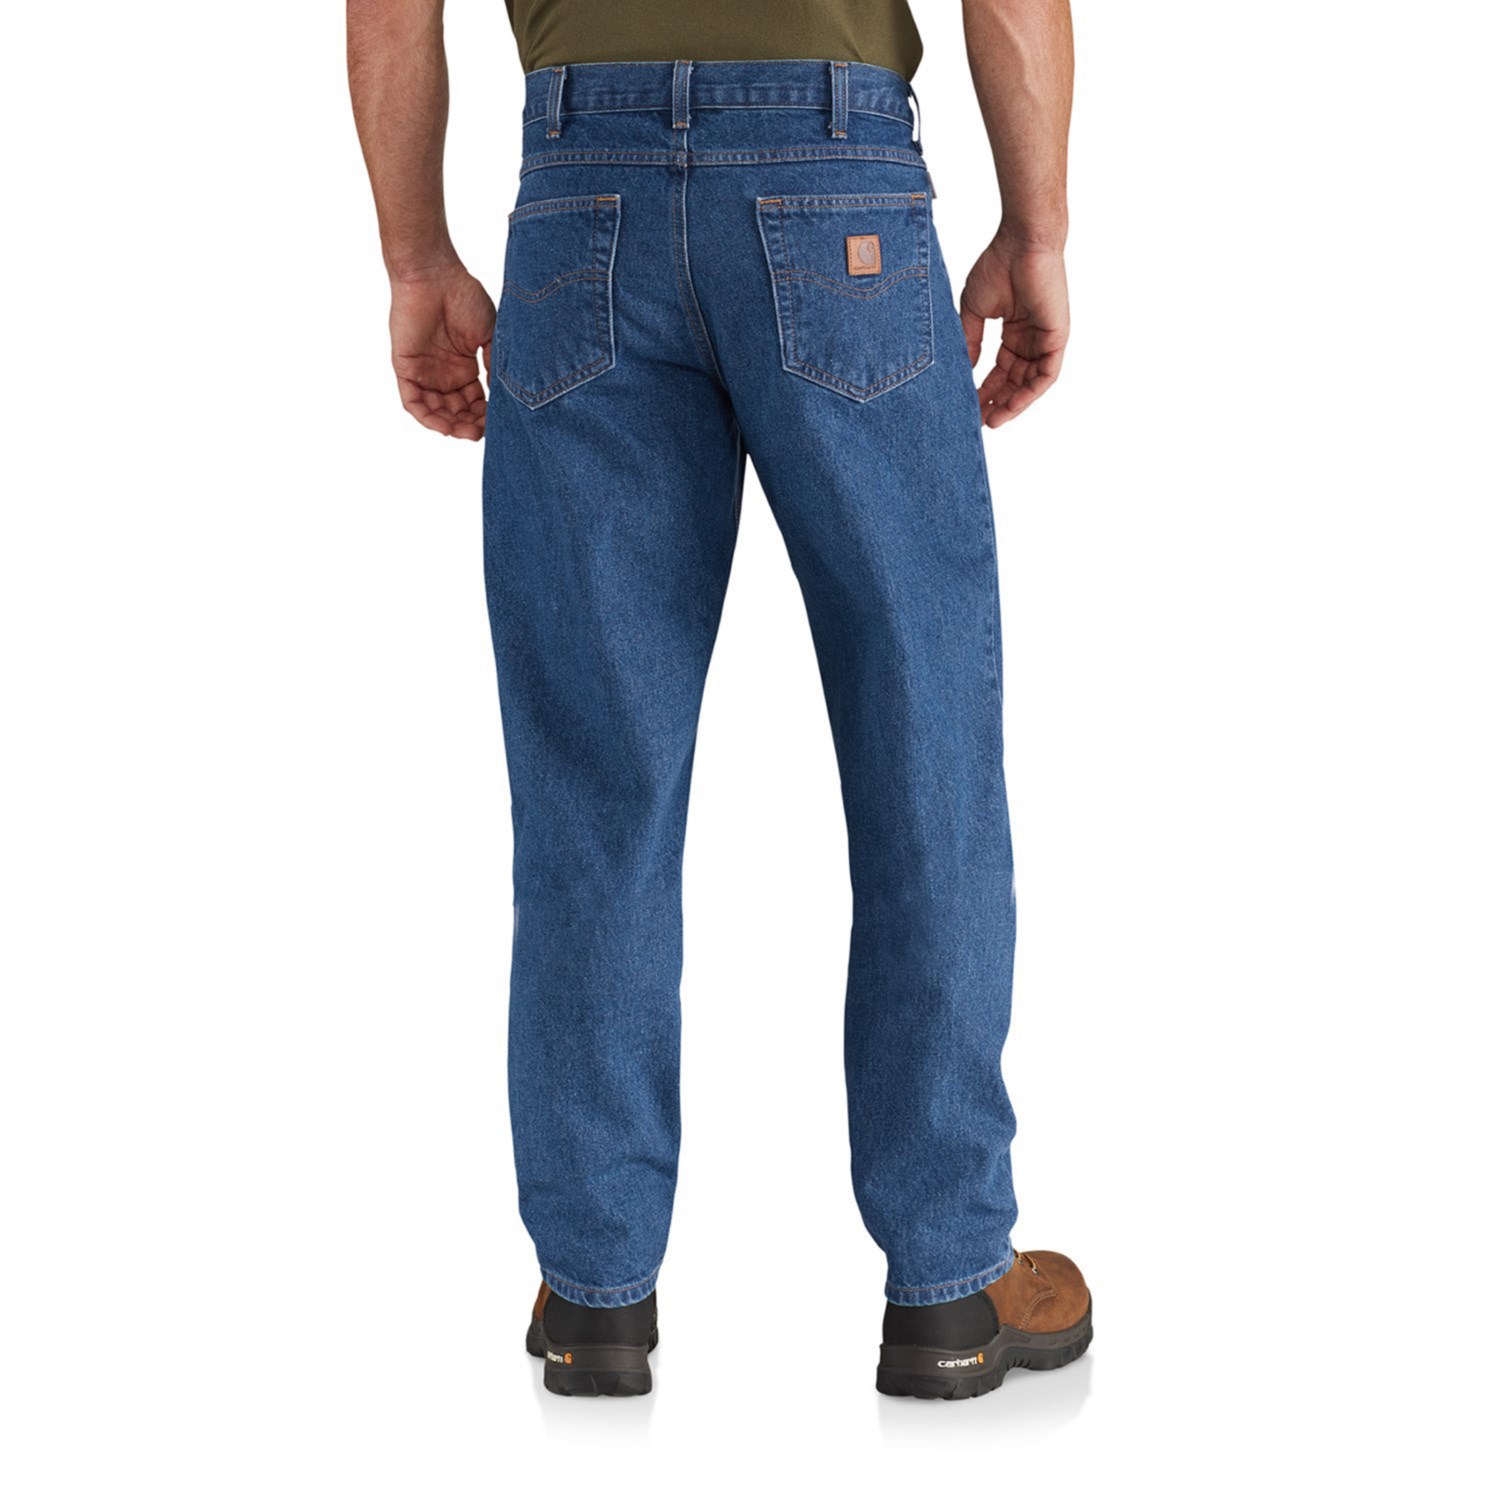 Carhartt B17 Relaxed Fit Tapered Leg Jeans (For Big and Tall Men)